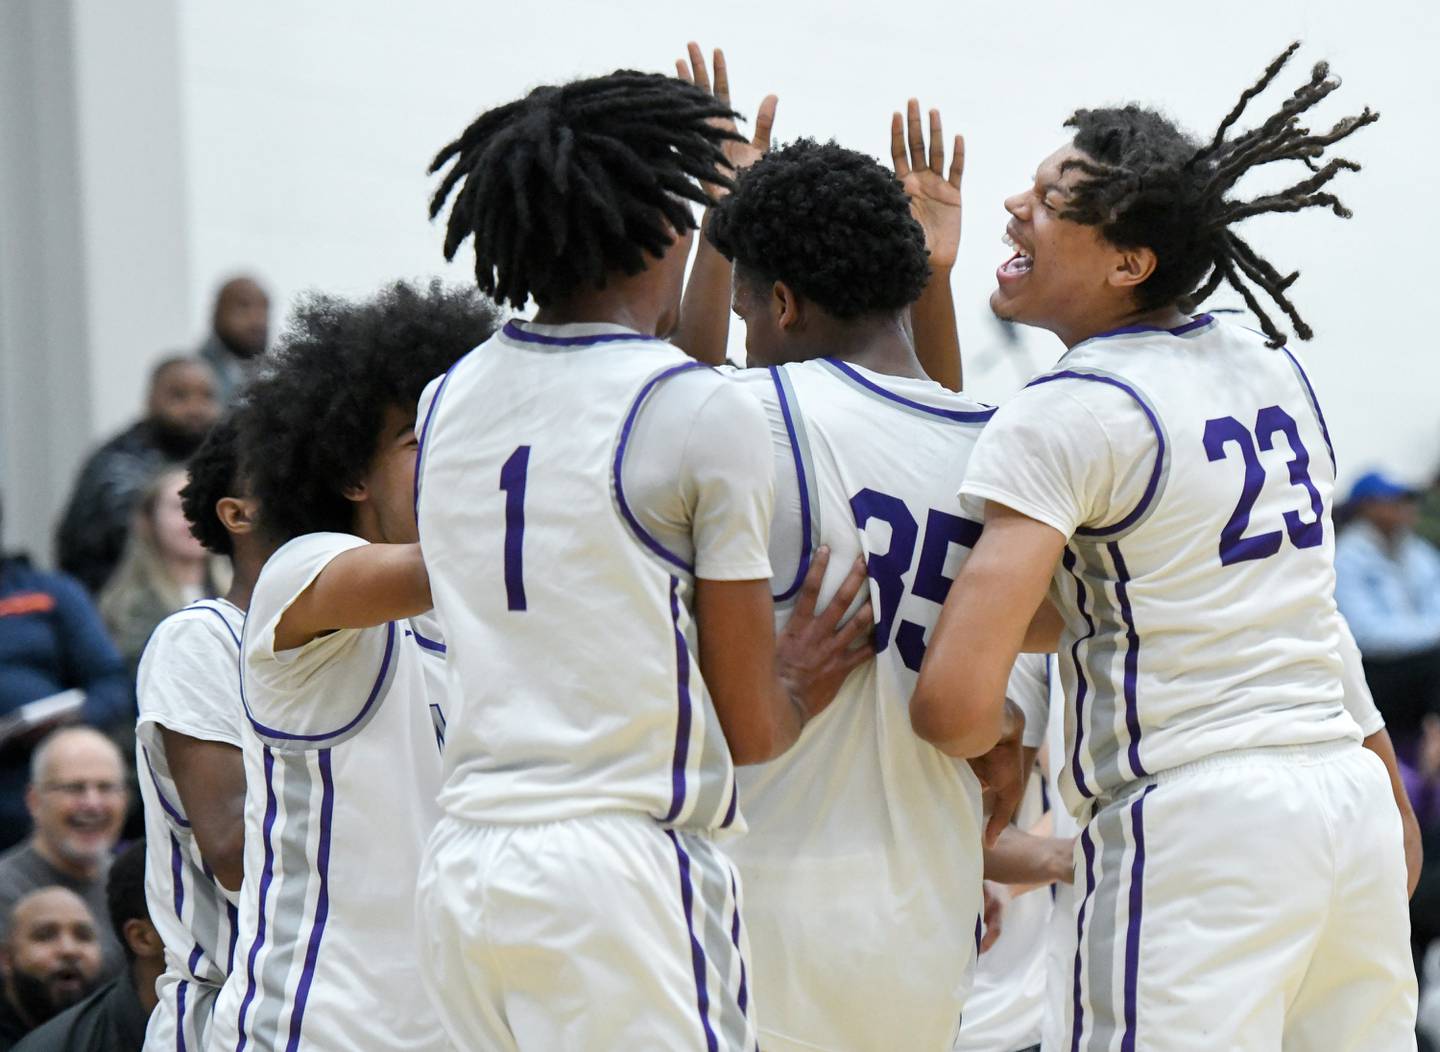 Mount Saint JosephÕs Tyonne Farrell, #23, celebrates with teammates in the second half of a high school basketball game against New Town, Tuesday, Jan. 3, 2023, in Baltimore. Mount Saint Joseph won 95-43.